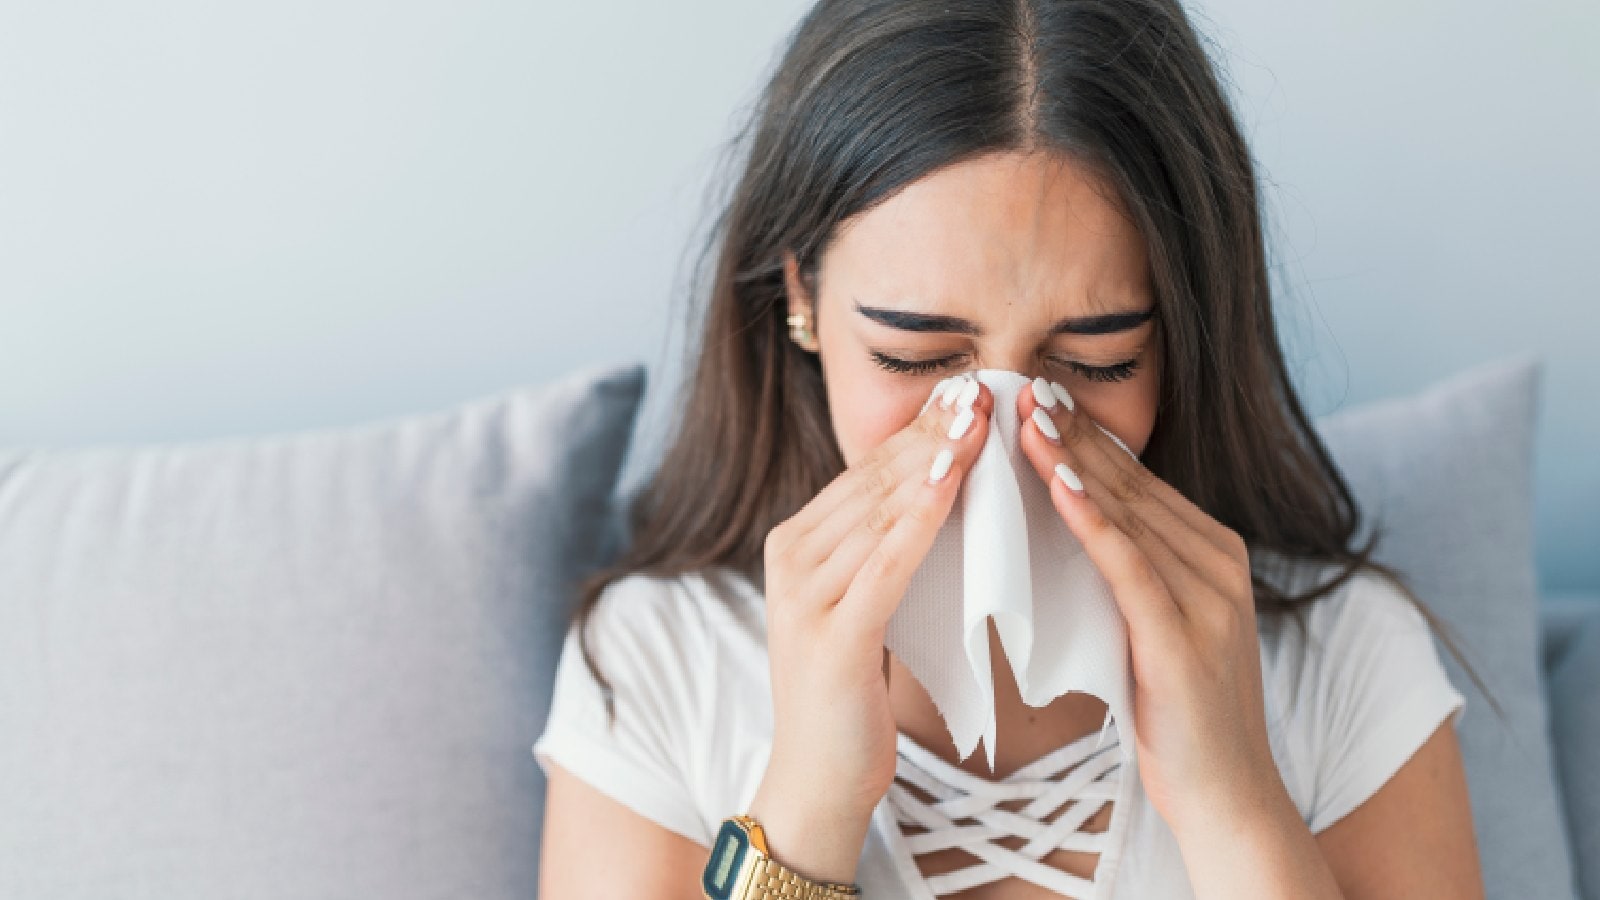 Stuffy nose in the monsoon?  Try these 3 home remedies for sinus infection